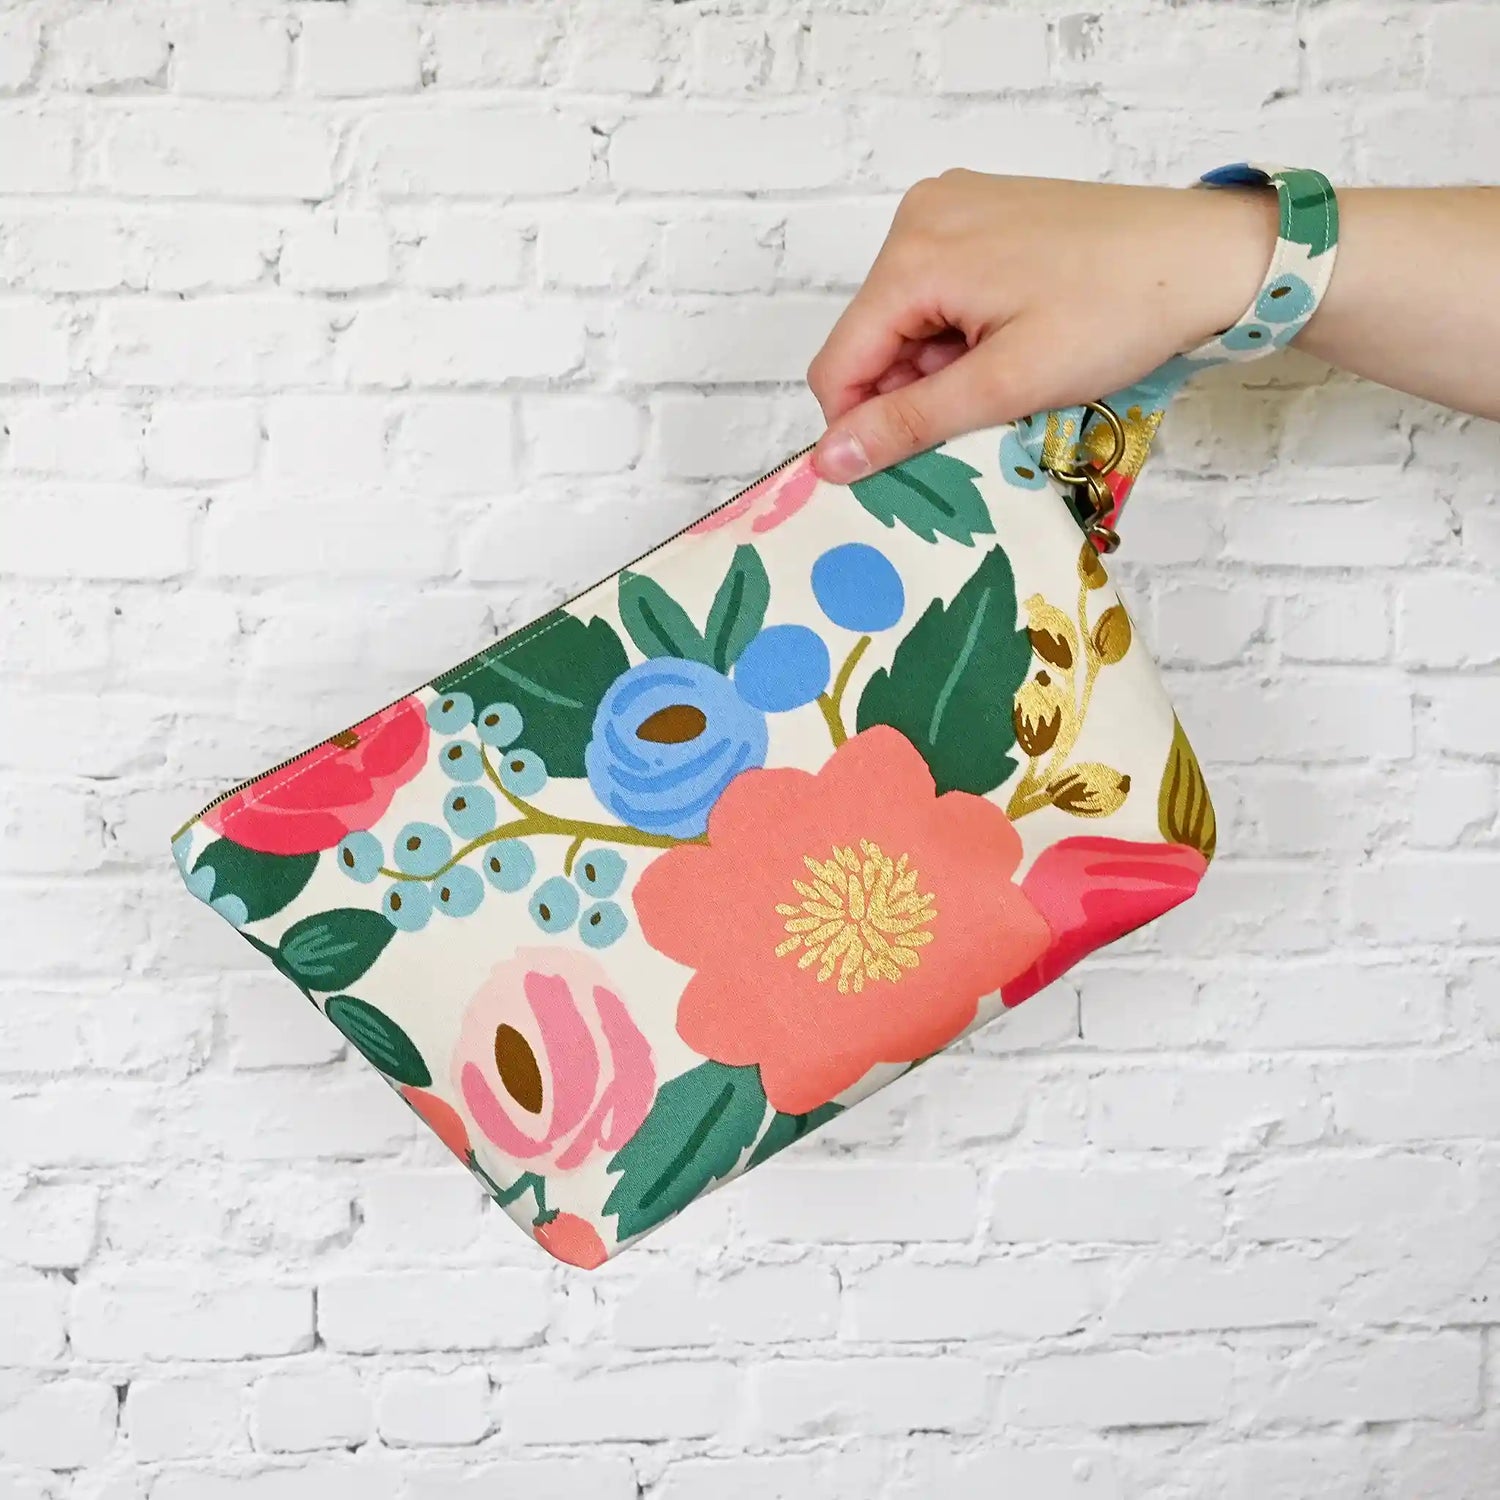 Cream floral canvas zippered pouch with removable wrist strap.  Made from Rifle Paper Co's Antique Garden.  Handmade in Nova Scotia, Canada.